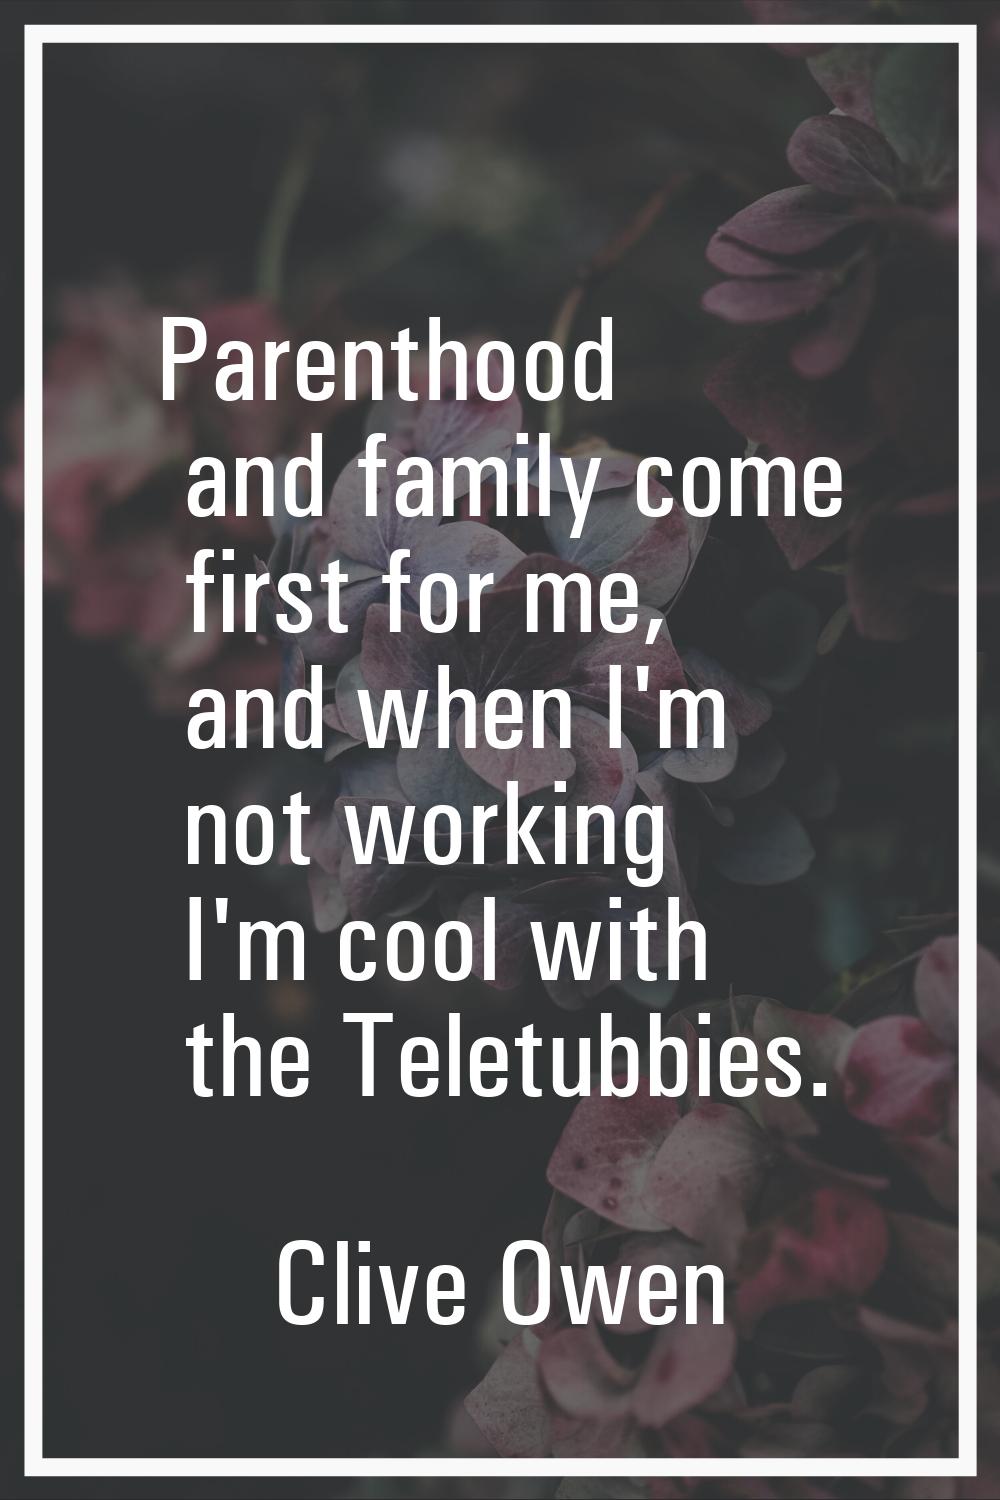 Parenthood and family come first for me, and when I'm not working I'm cool with the Teletubbies.